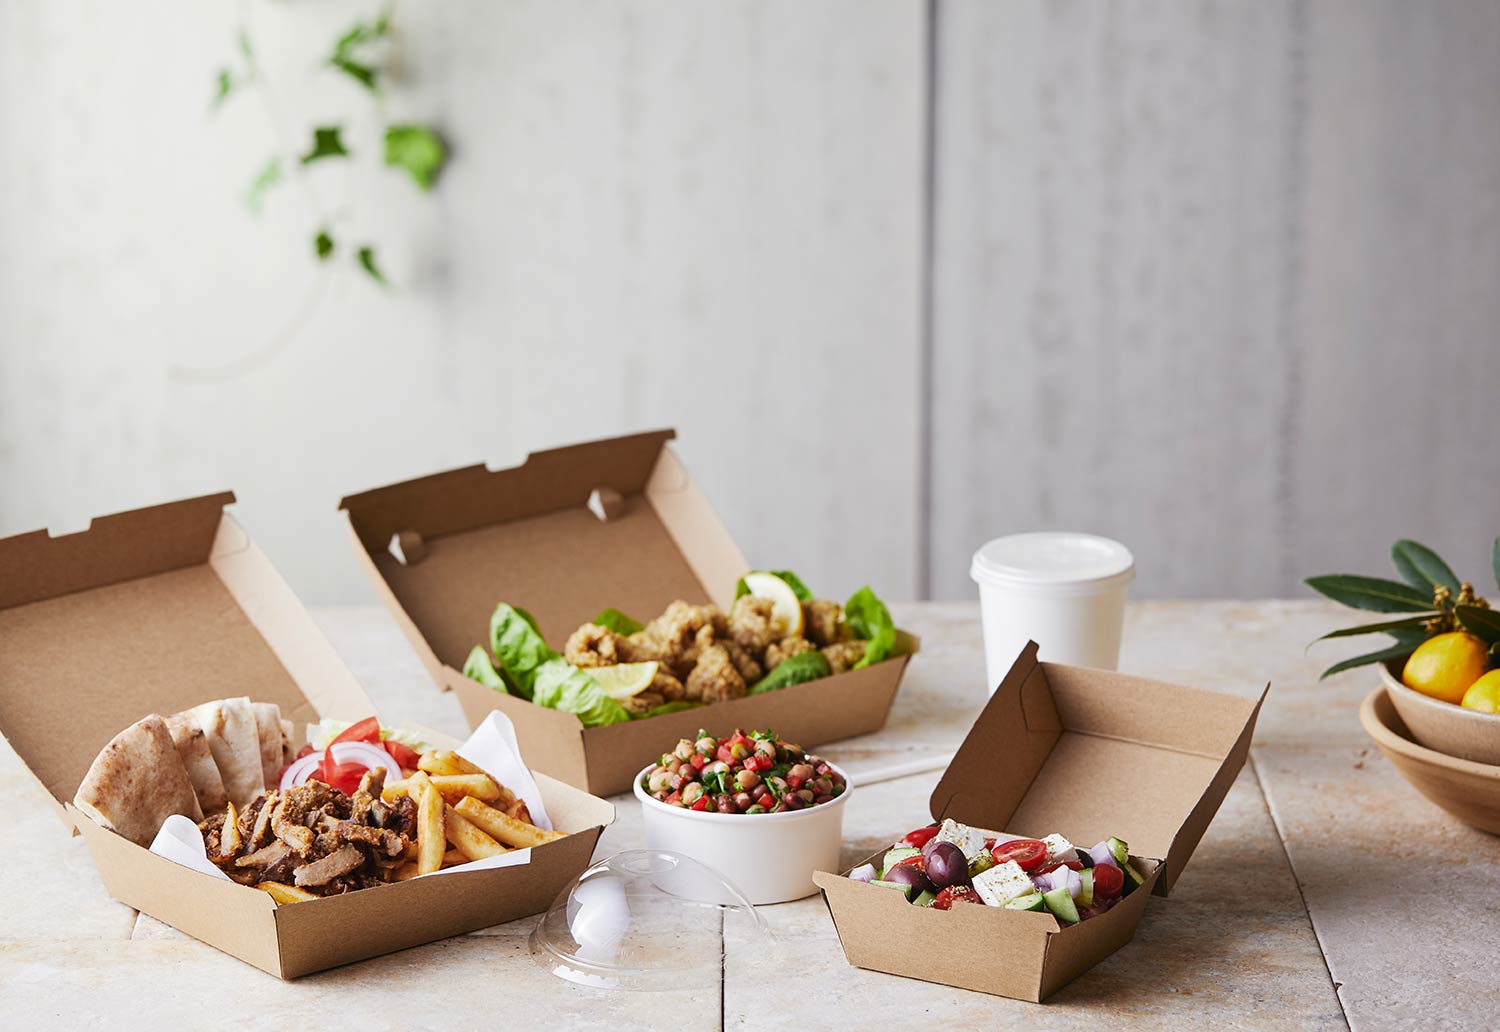 Image of food delivery packaging from Detpak